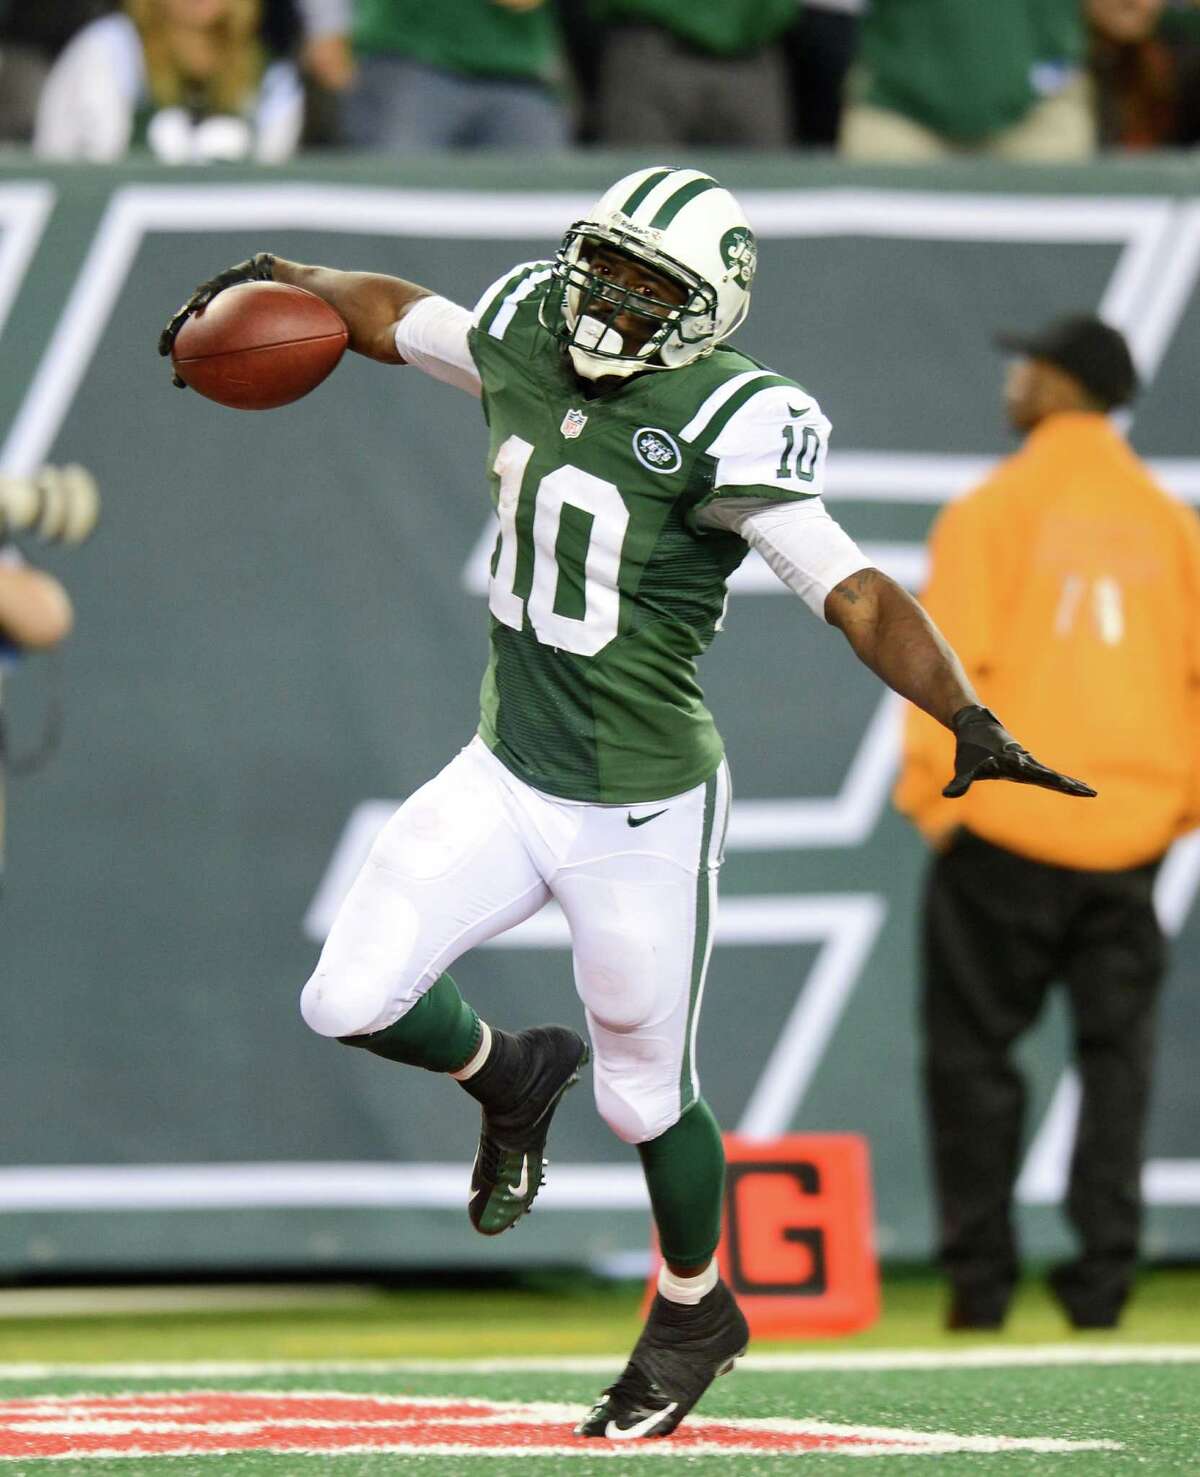 Santonio Holmes helped the Jets rise above a franchise-worst 20 penalties for a 27-20 victory over the Bills.